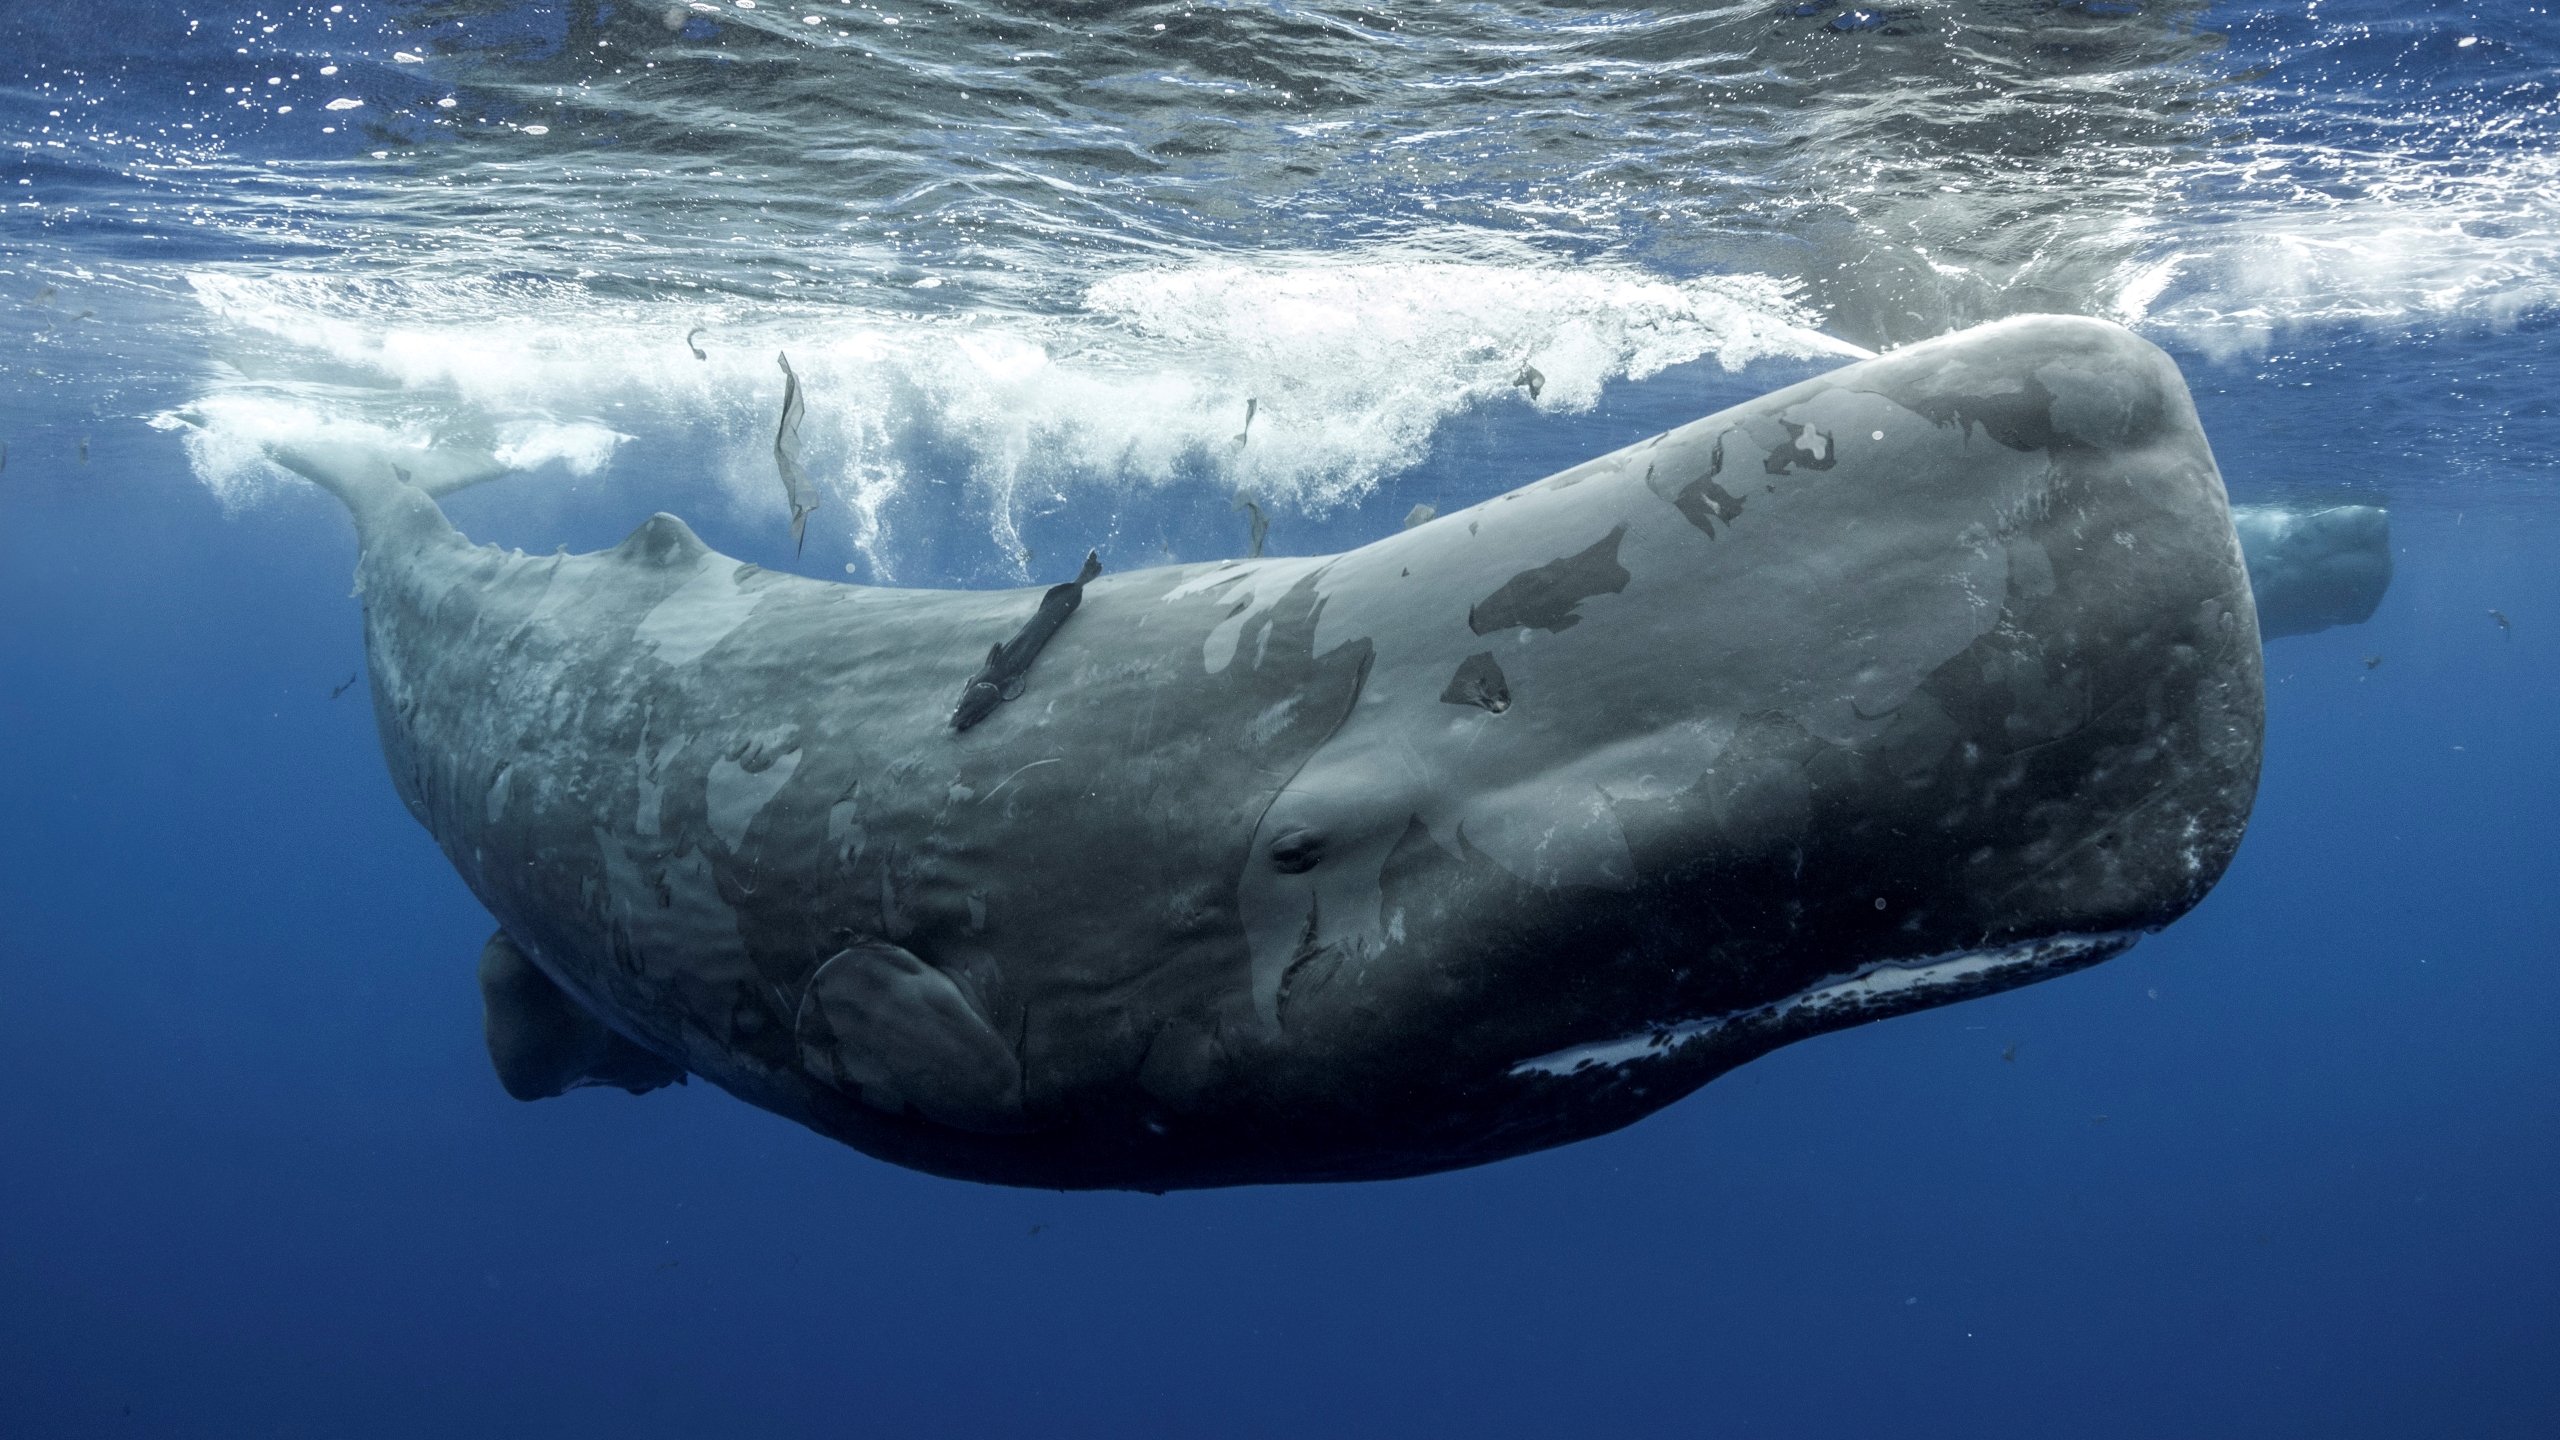 Sperm whales: The biggest toothed predator | Live Science